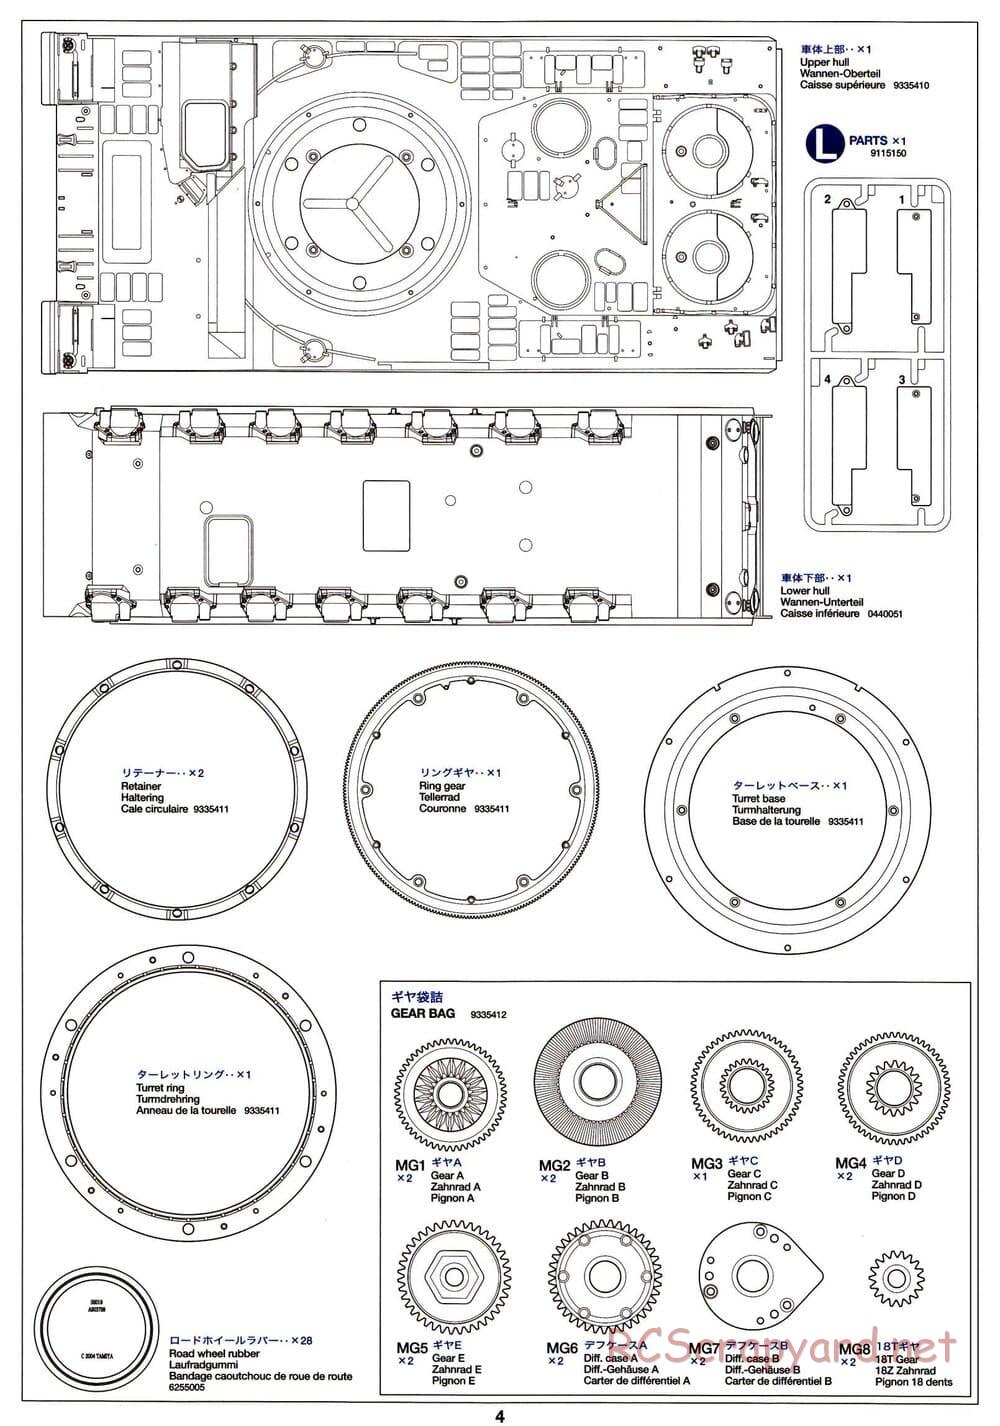 Tamiya - Leopard 2 A6 - 1/16 Scale Chassis - Parts 4